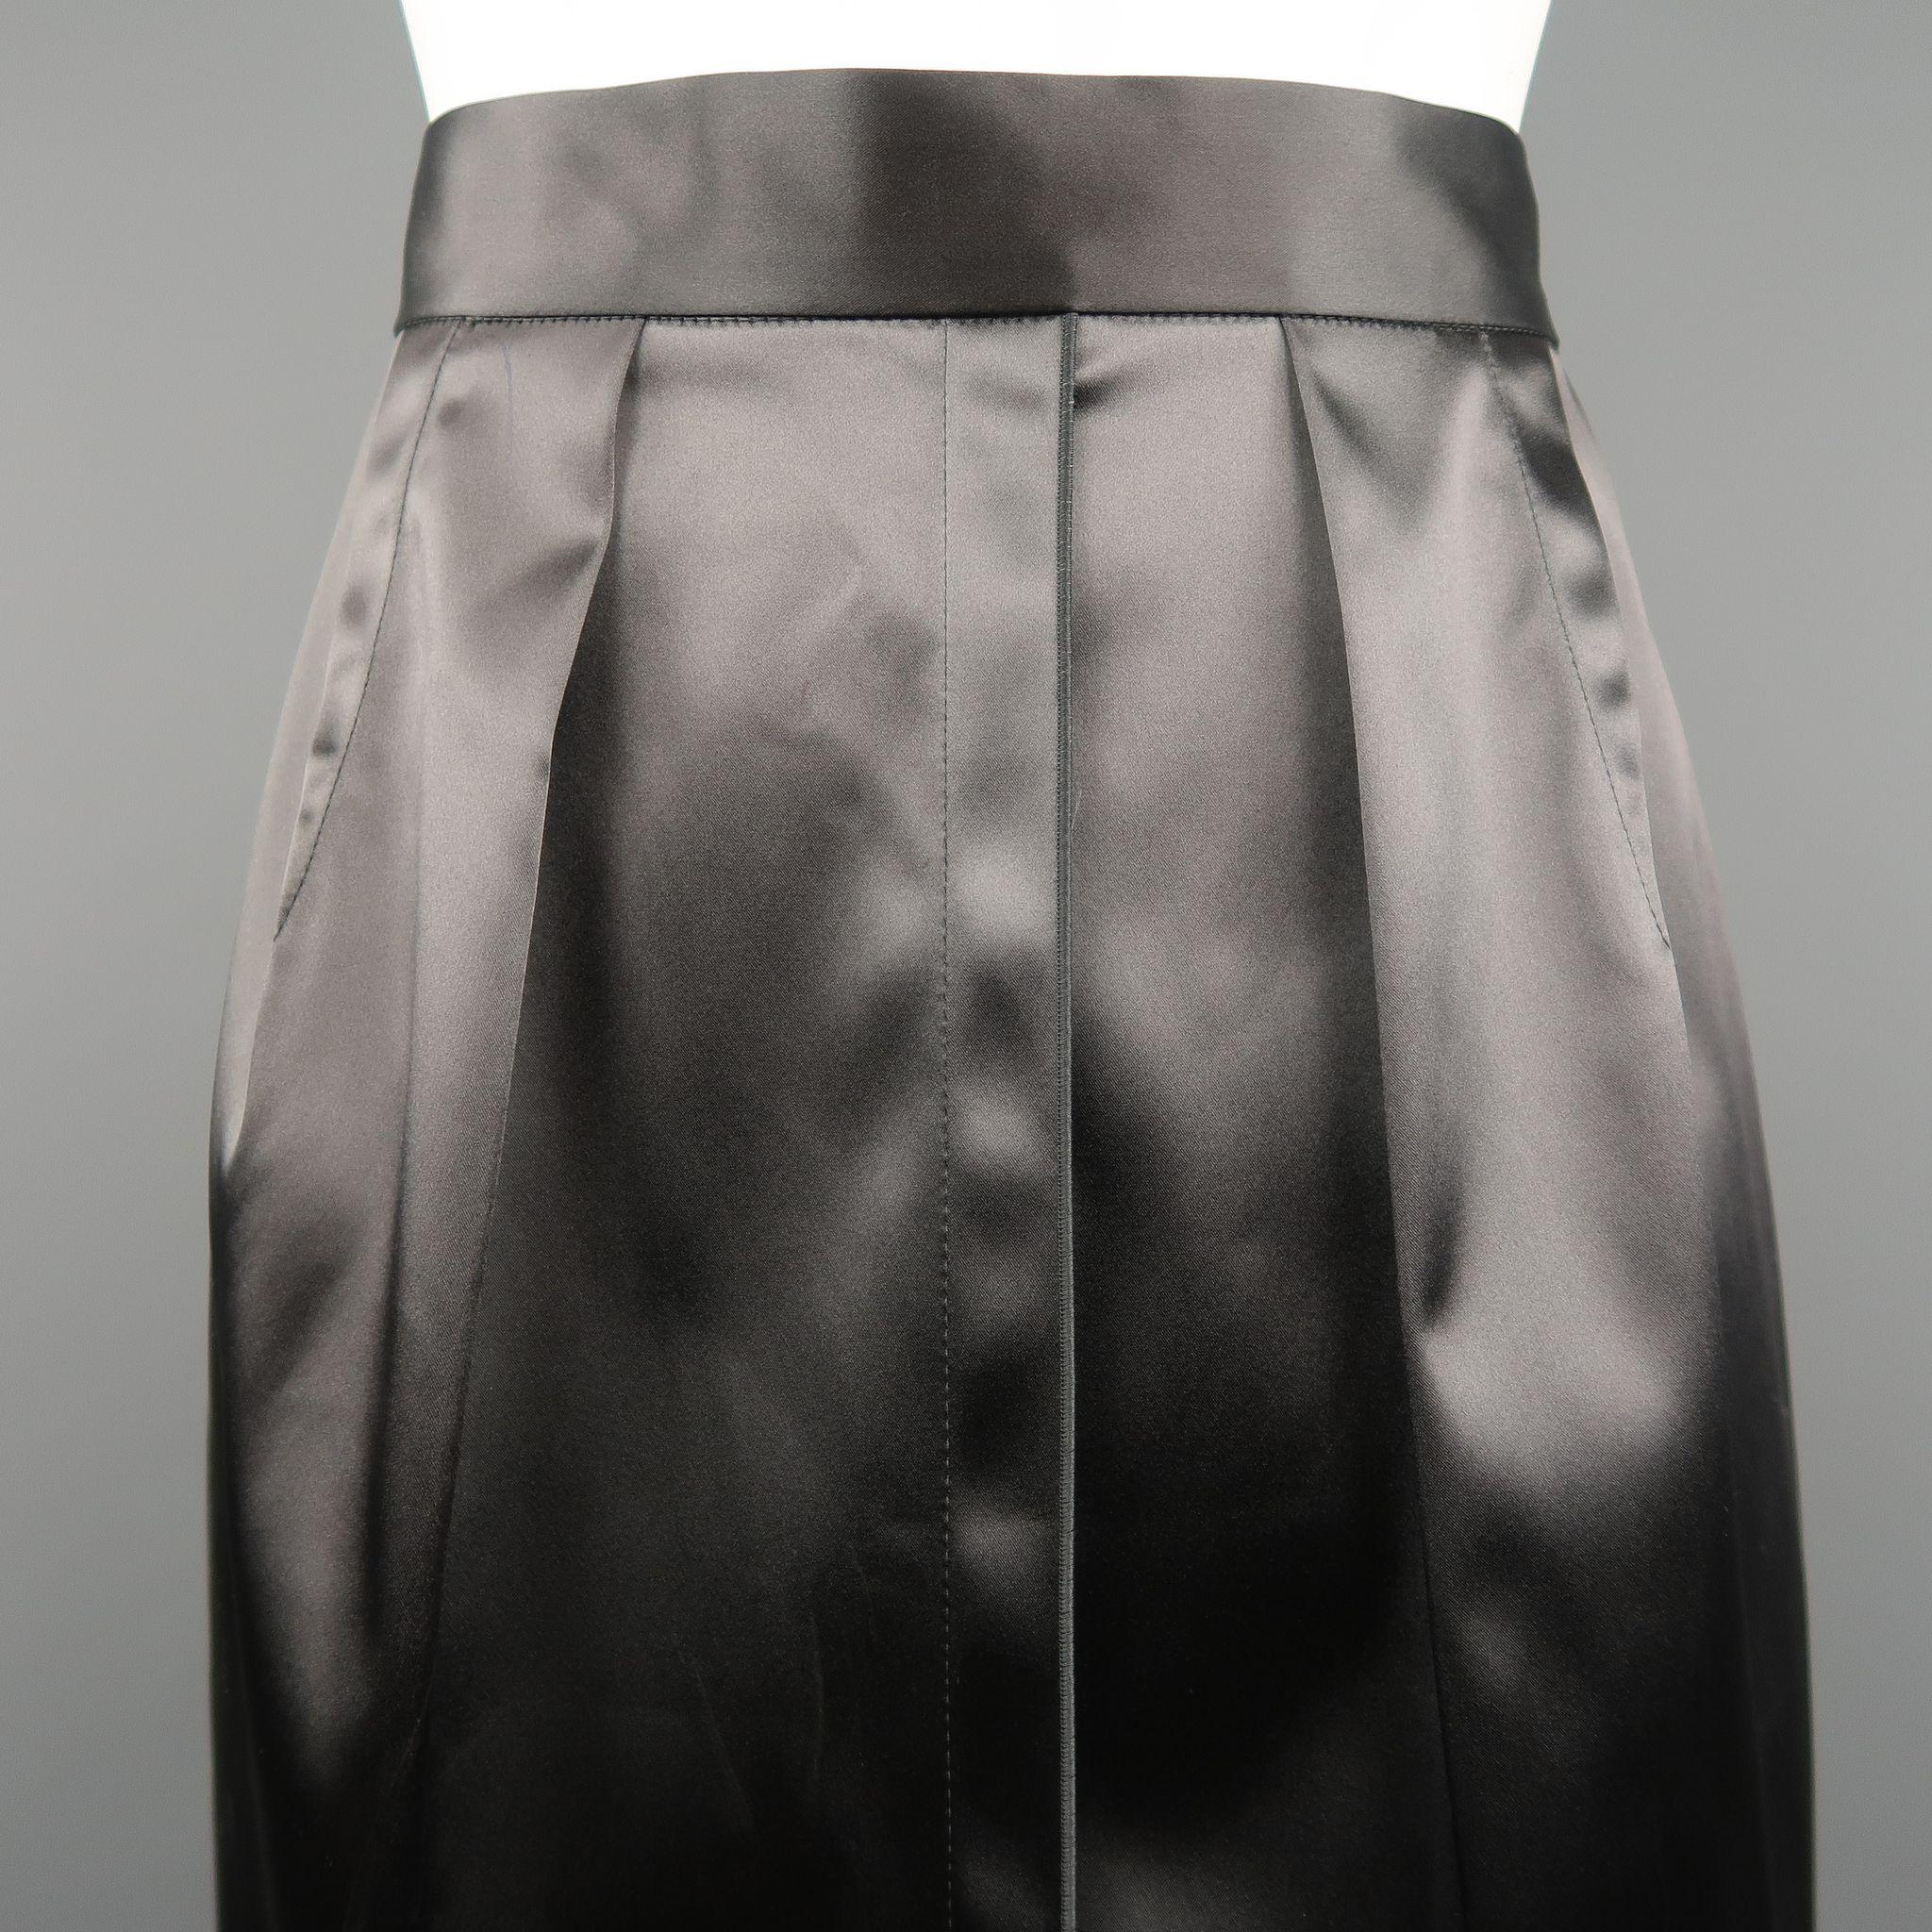 DOLCE & GABBANA pencil skirt come sin stretch satin with a high rise, pleated darts, and back zip. Made in Italy.

New with Tags.
Marked: IT 40

Measurements:
    Waist: 26 in.
    Hip: 38 in.
    Length: 25 in. 

SKU: 86440
Category: Skirt

More